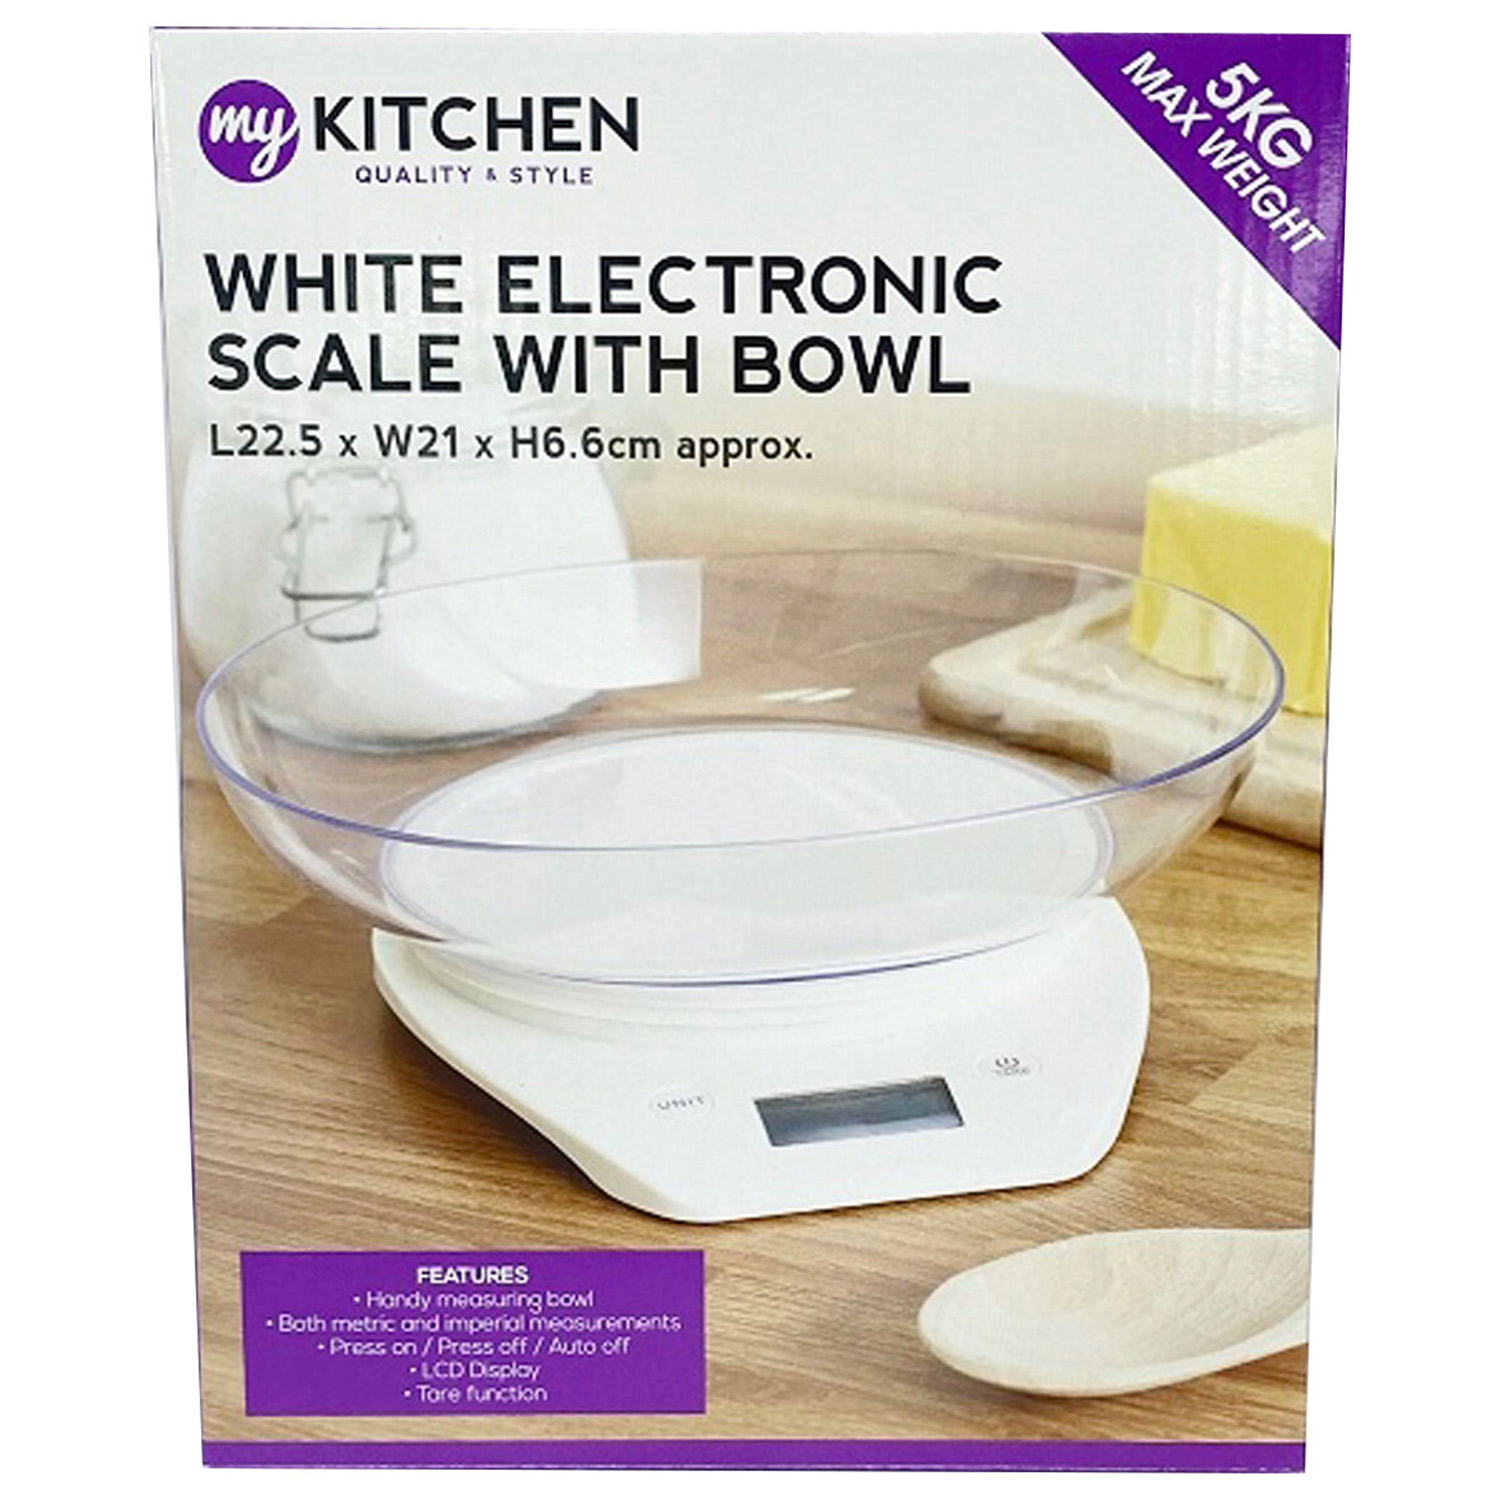 MY Removable Bowl Electronic Kitchen Scale Image